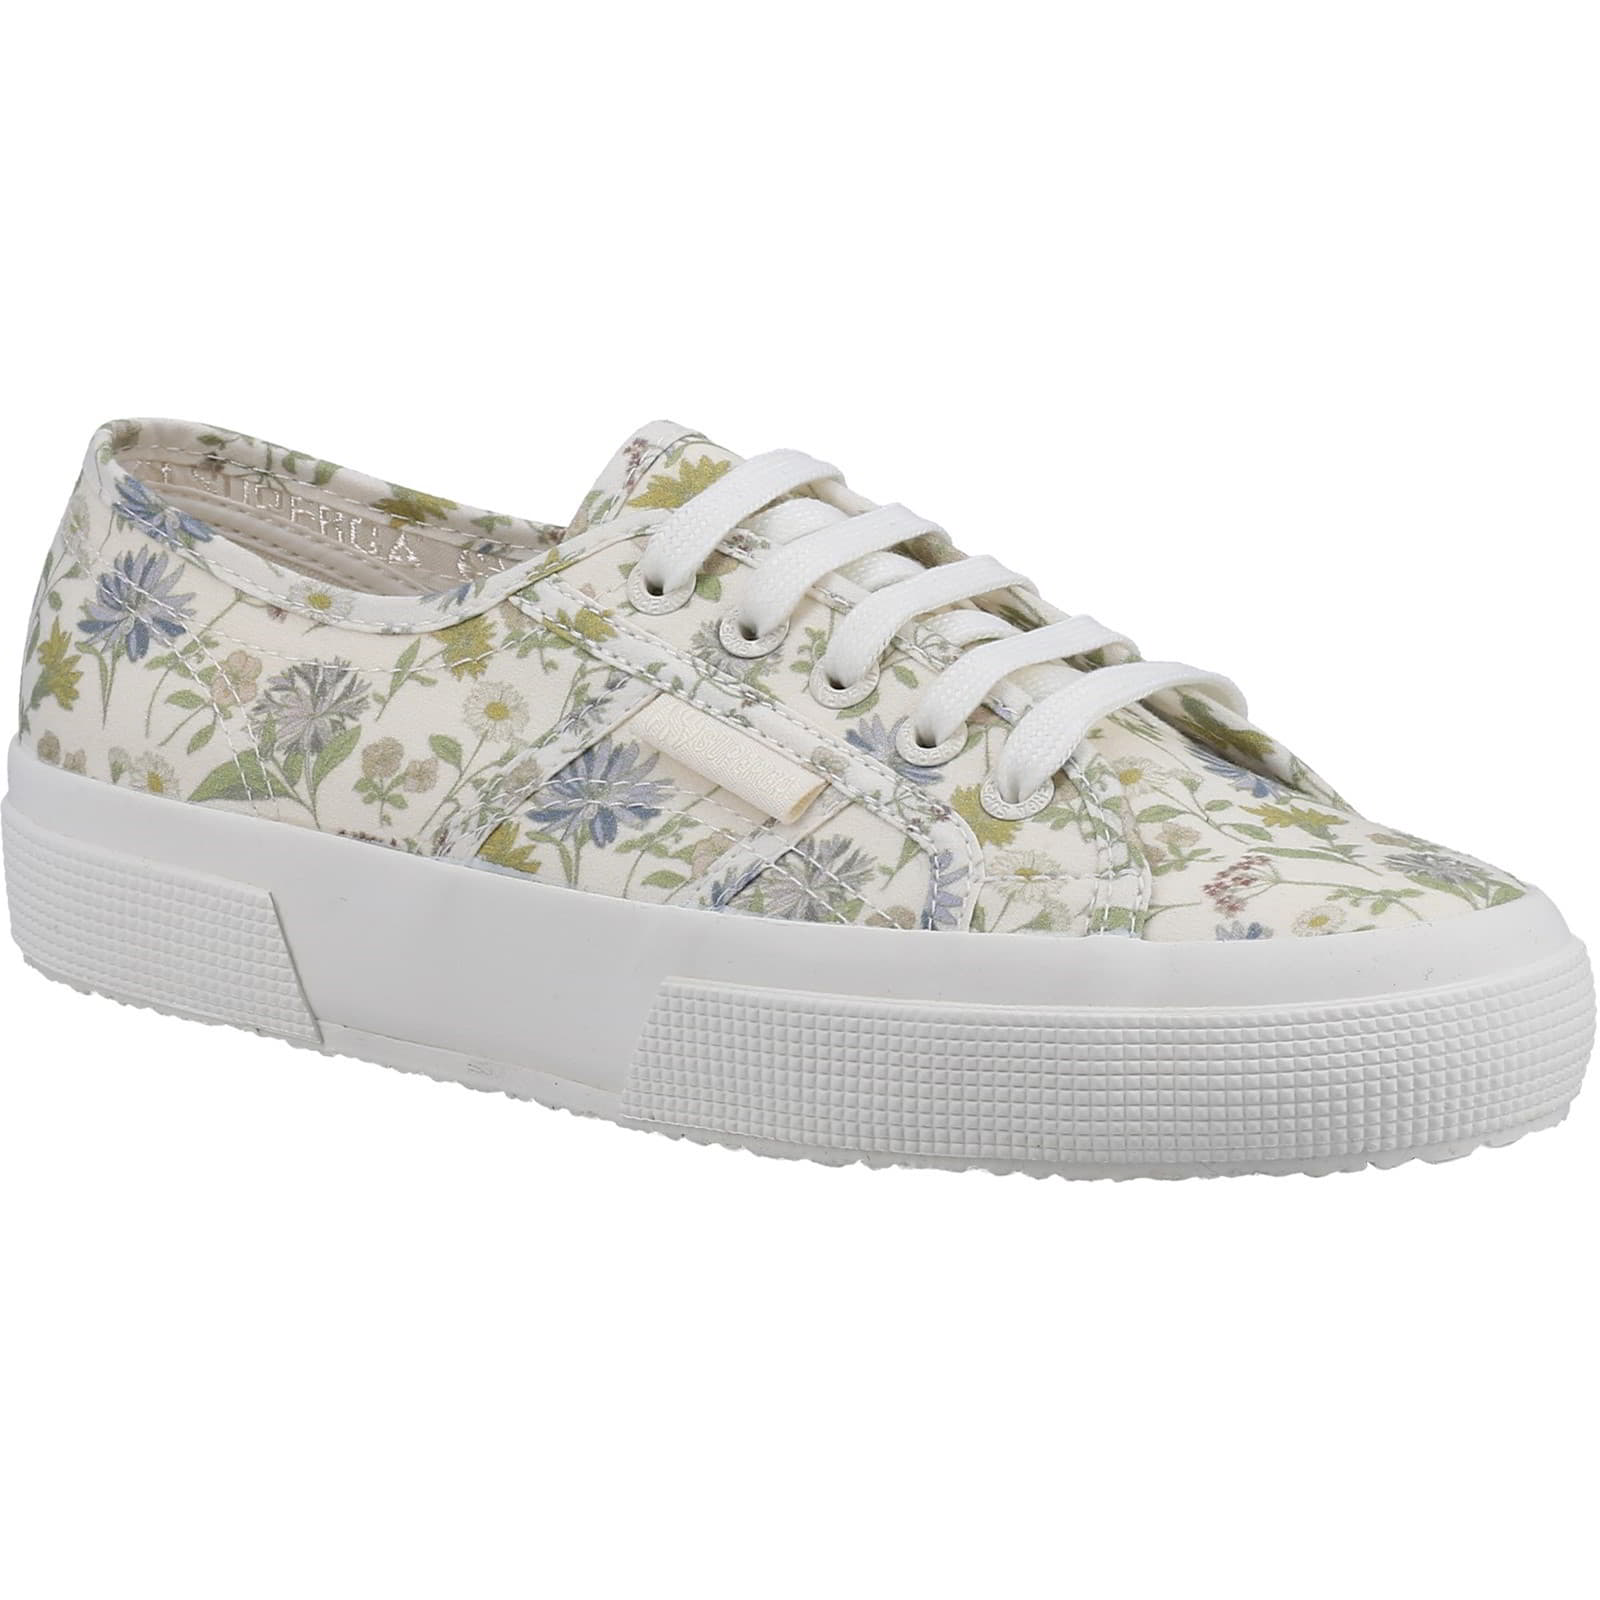 Superga Women's 2750 Floral Print Lace Up Trainers Shoes - UK 5.5